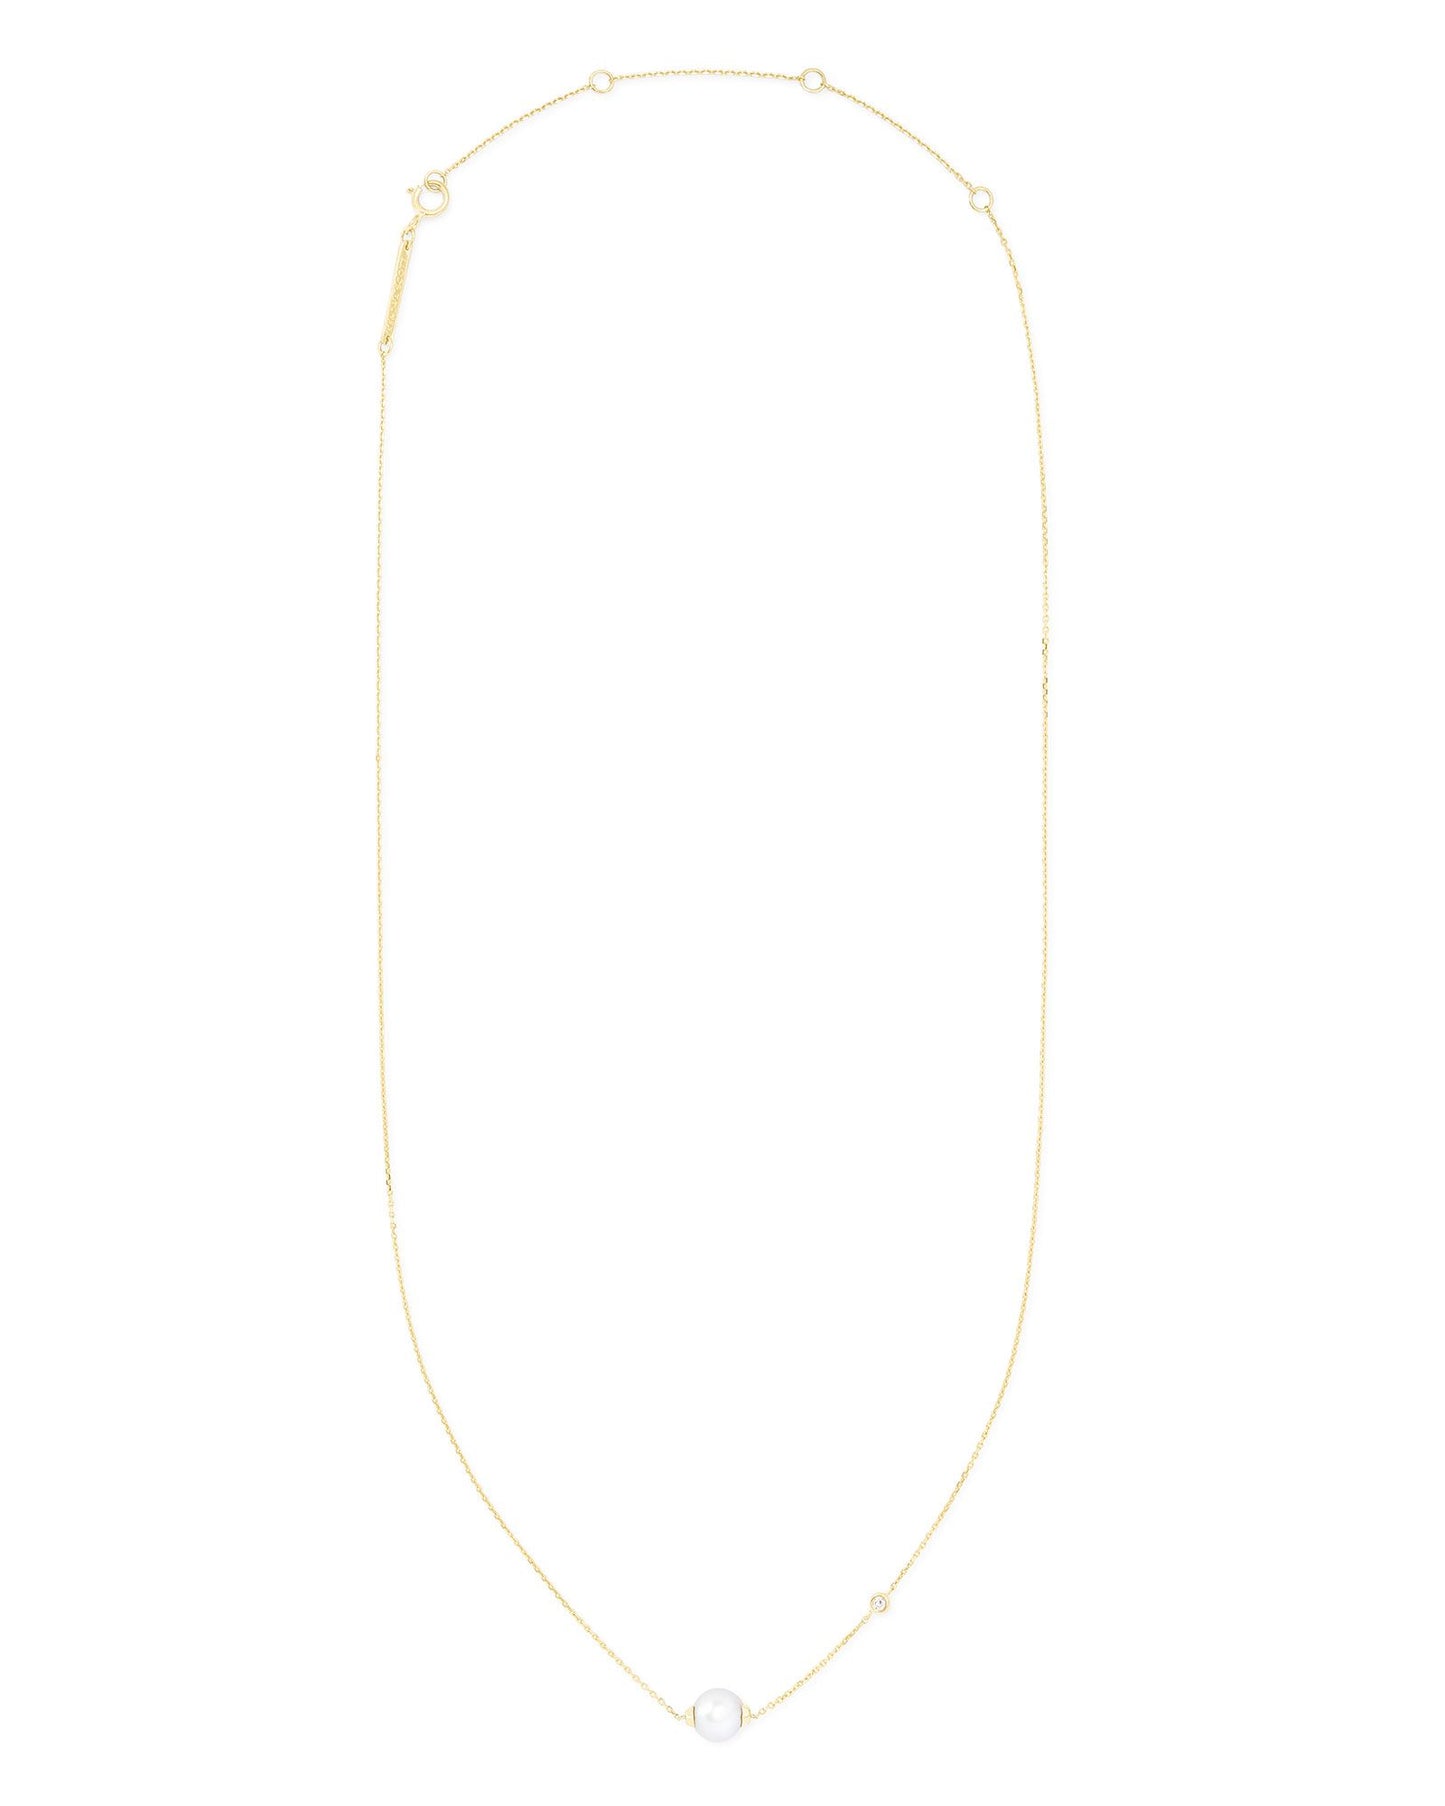 Kendra Scott Cathleen Short Pendant 14K Gold White Pearl-Necklaces-Kendra Scott-N1312GLD-The Twisted Chandelier